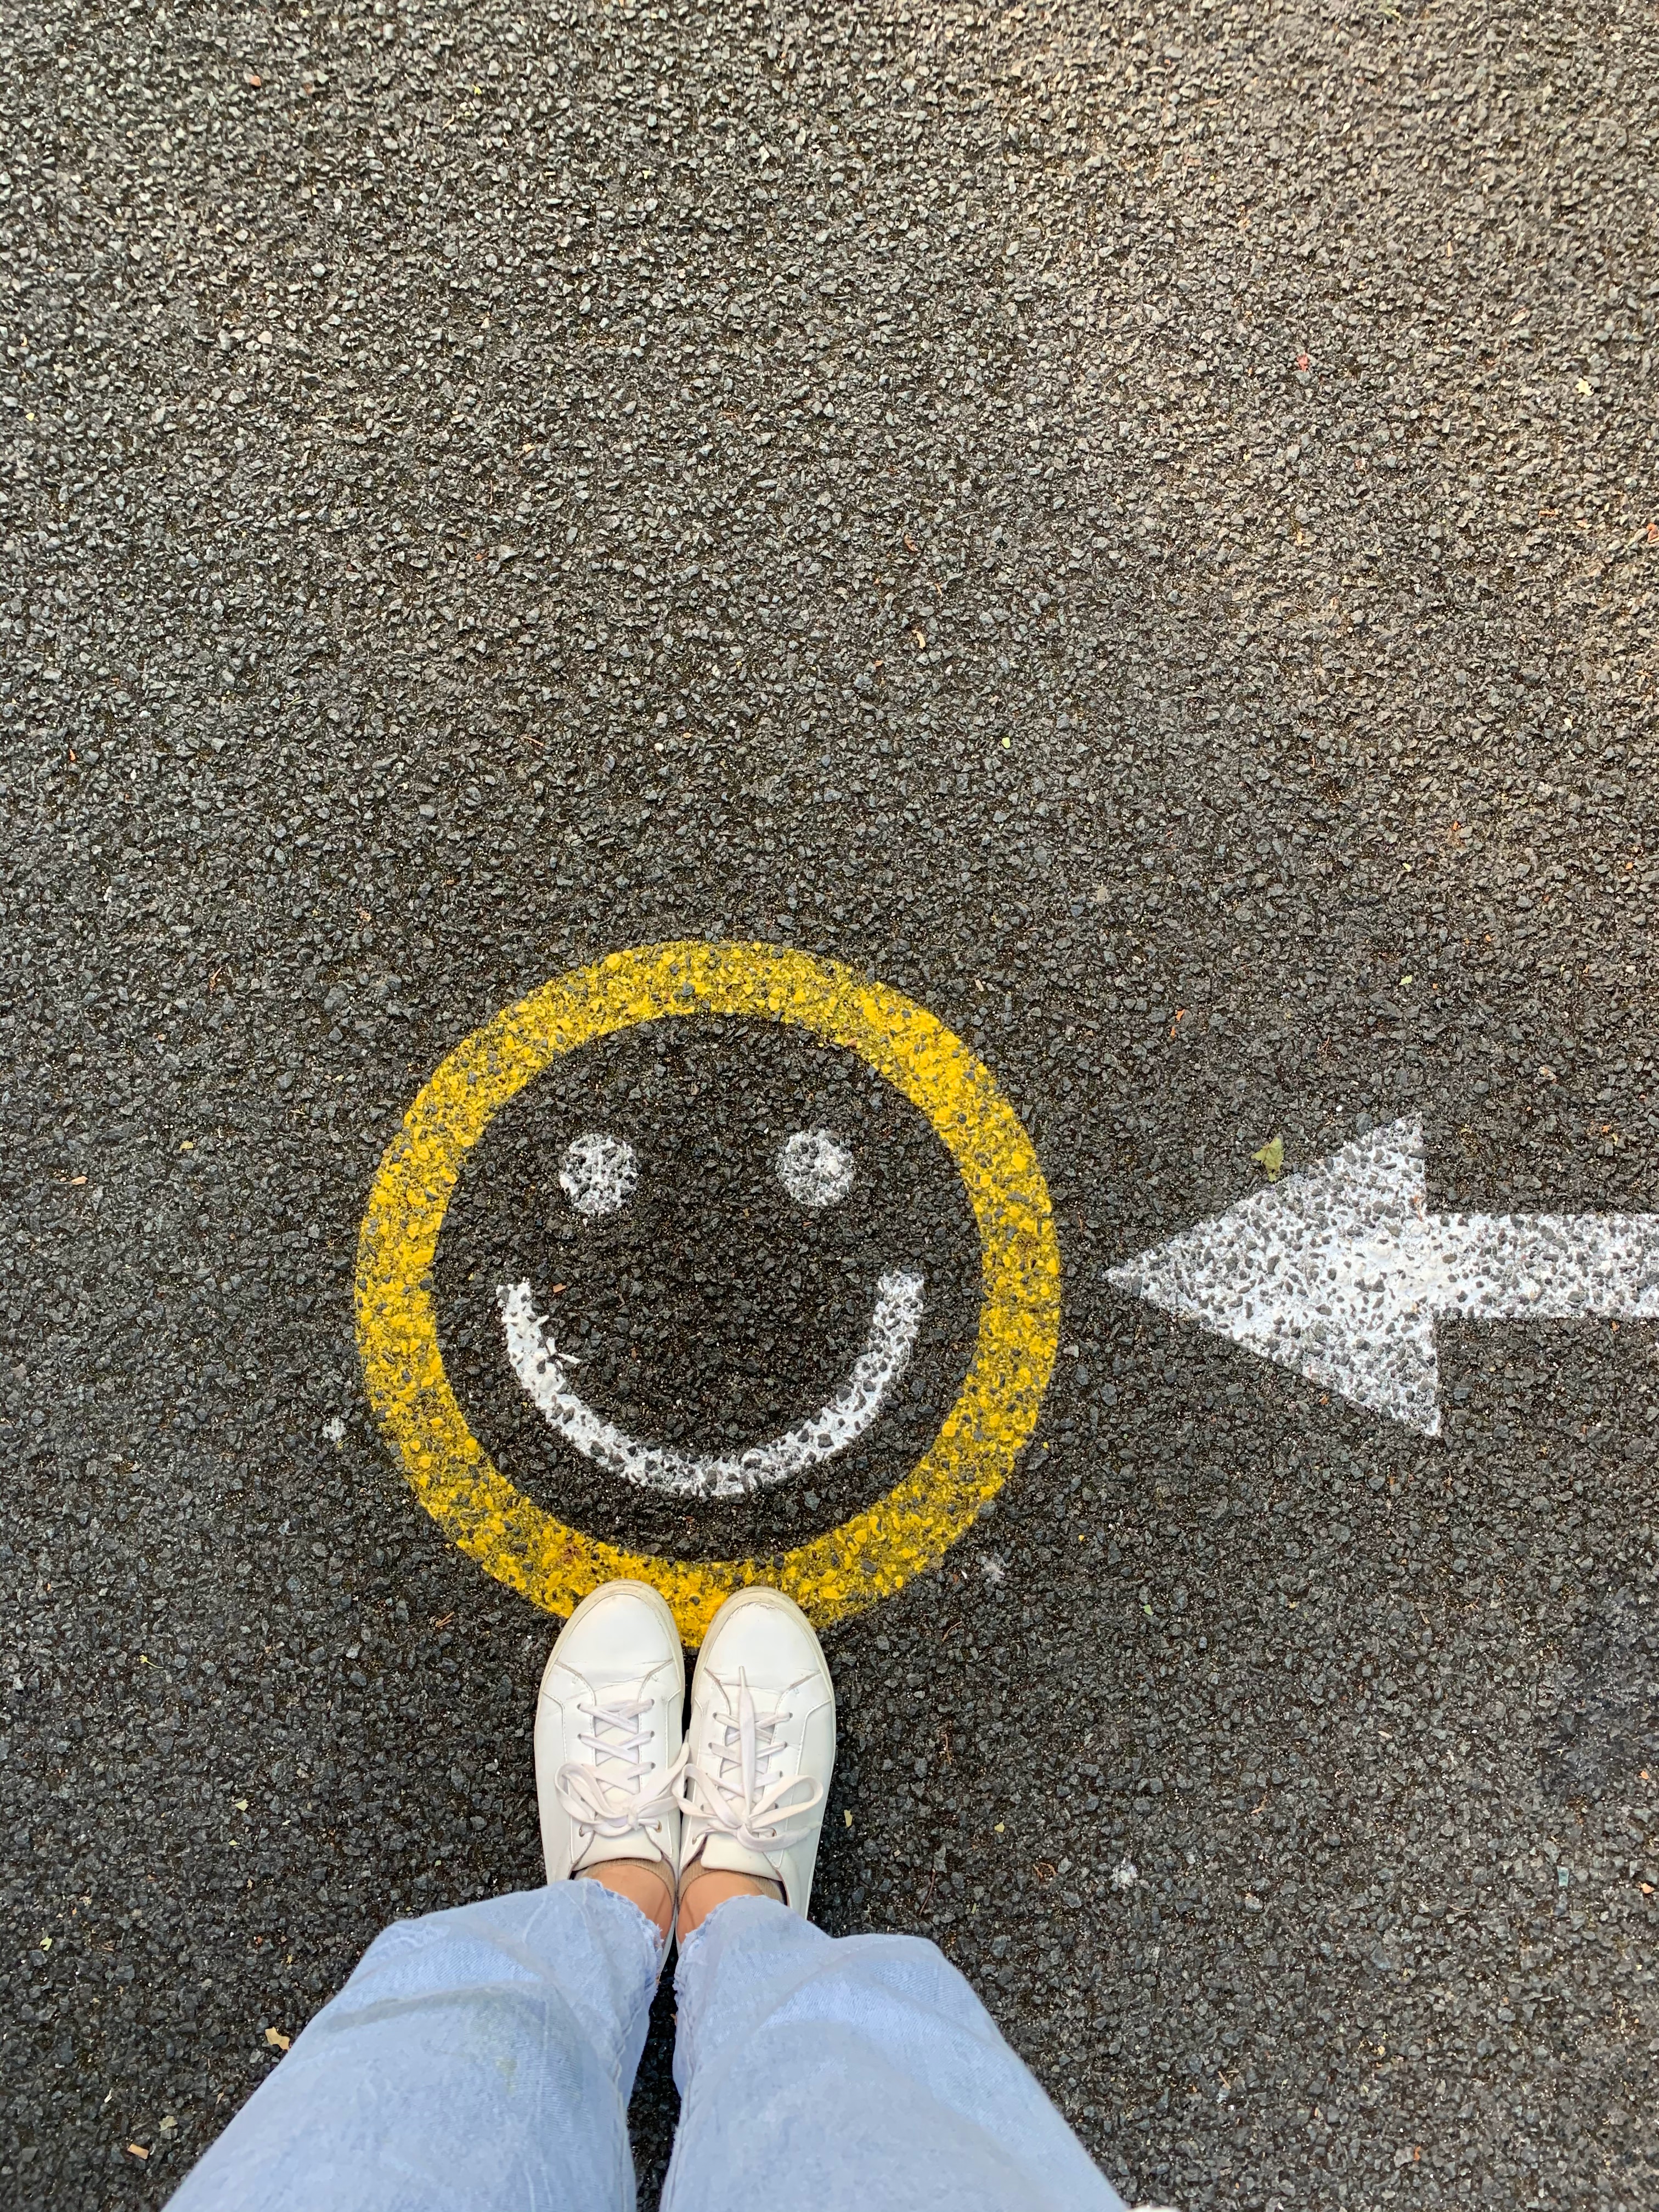 person standing on smiley face with an arrow chalk drawing on pavement